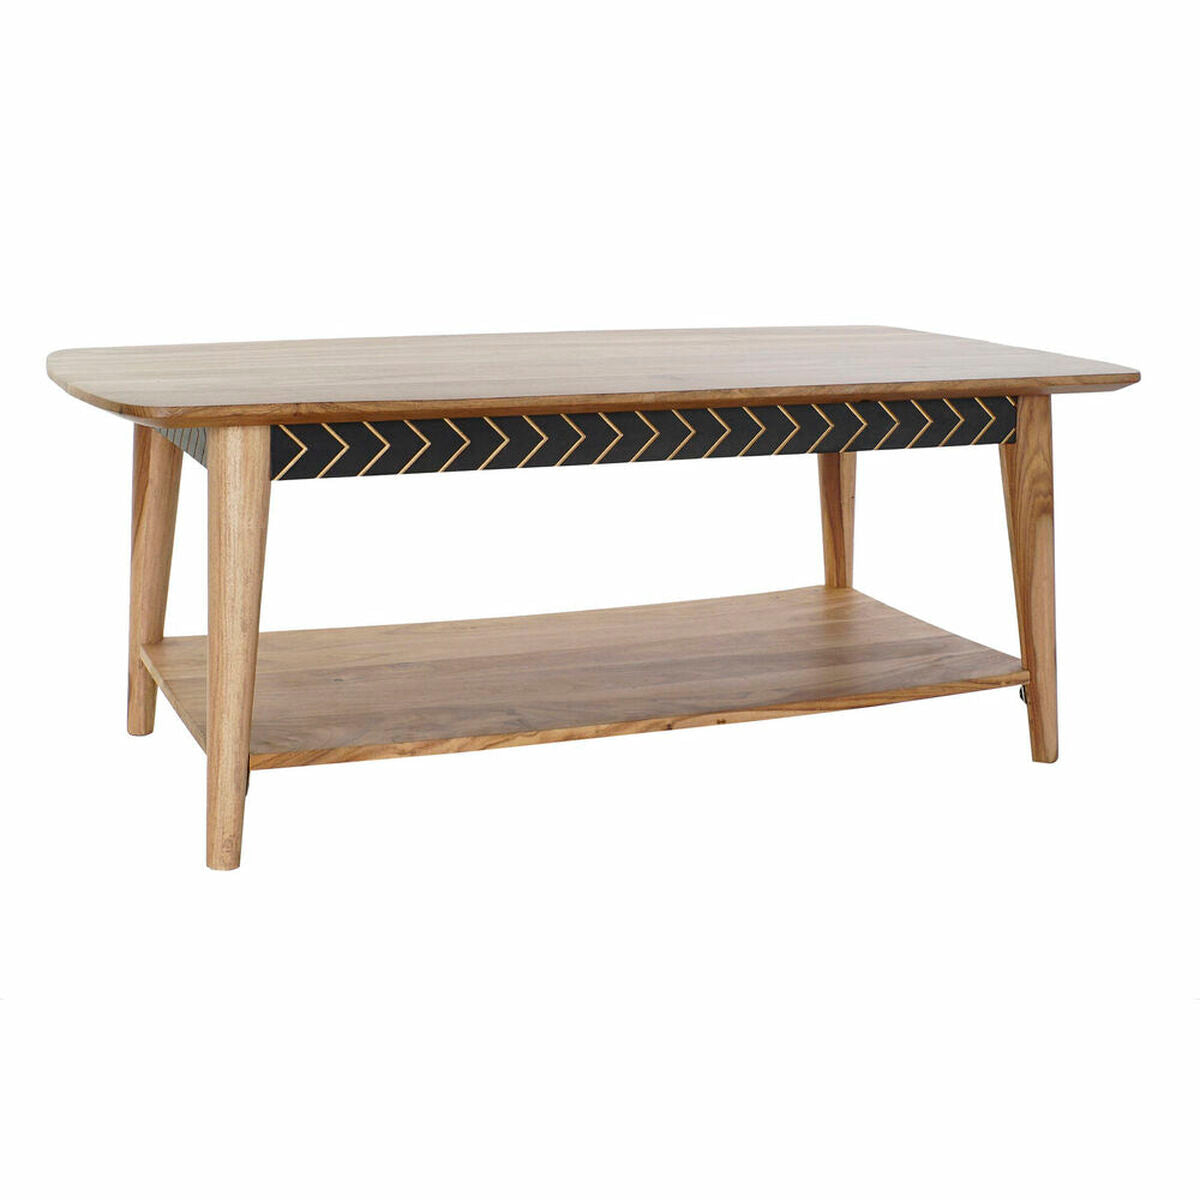 Centre Table in Wood (117 x 60 x 45 cm)